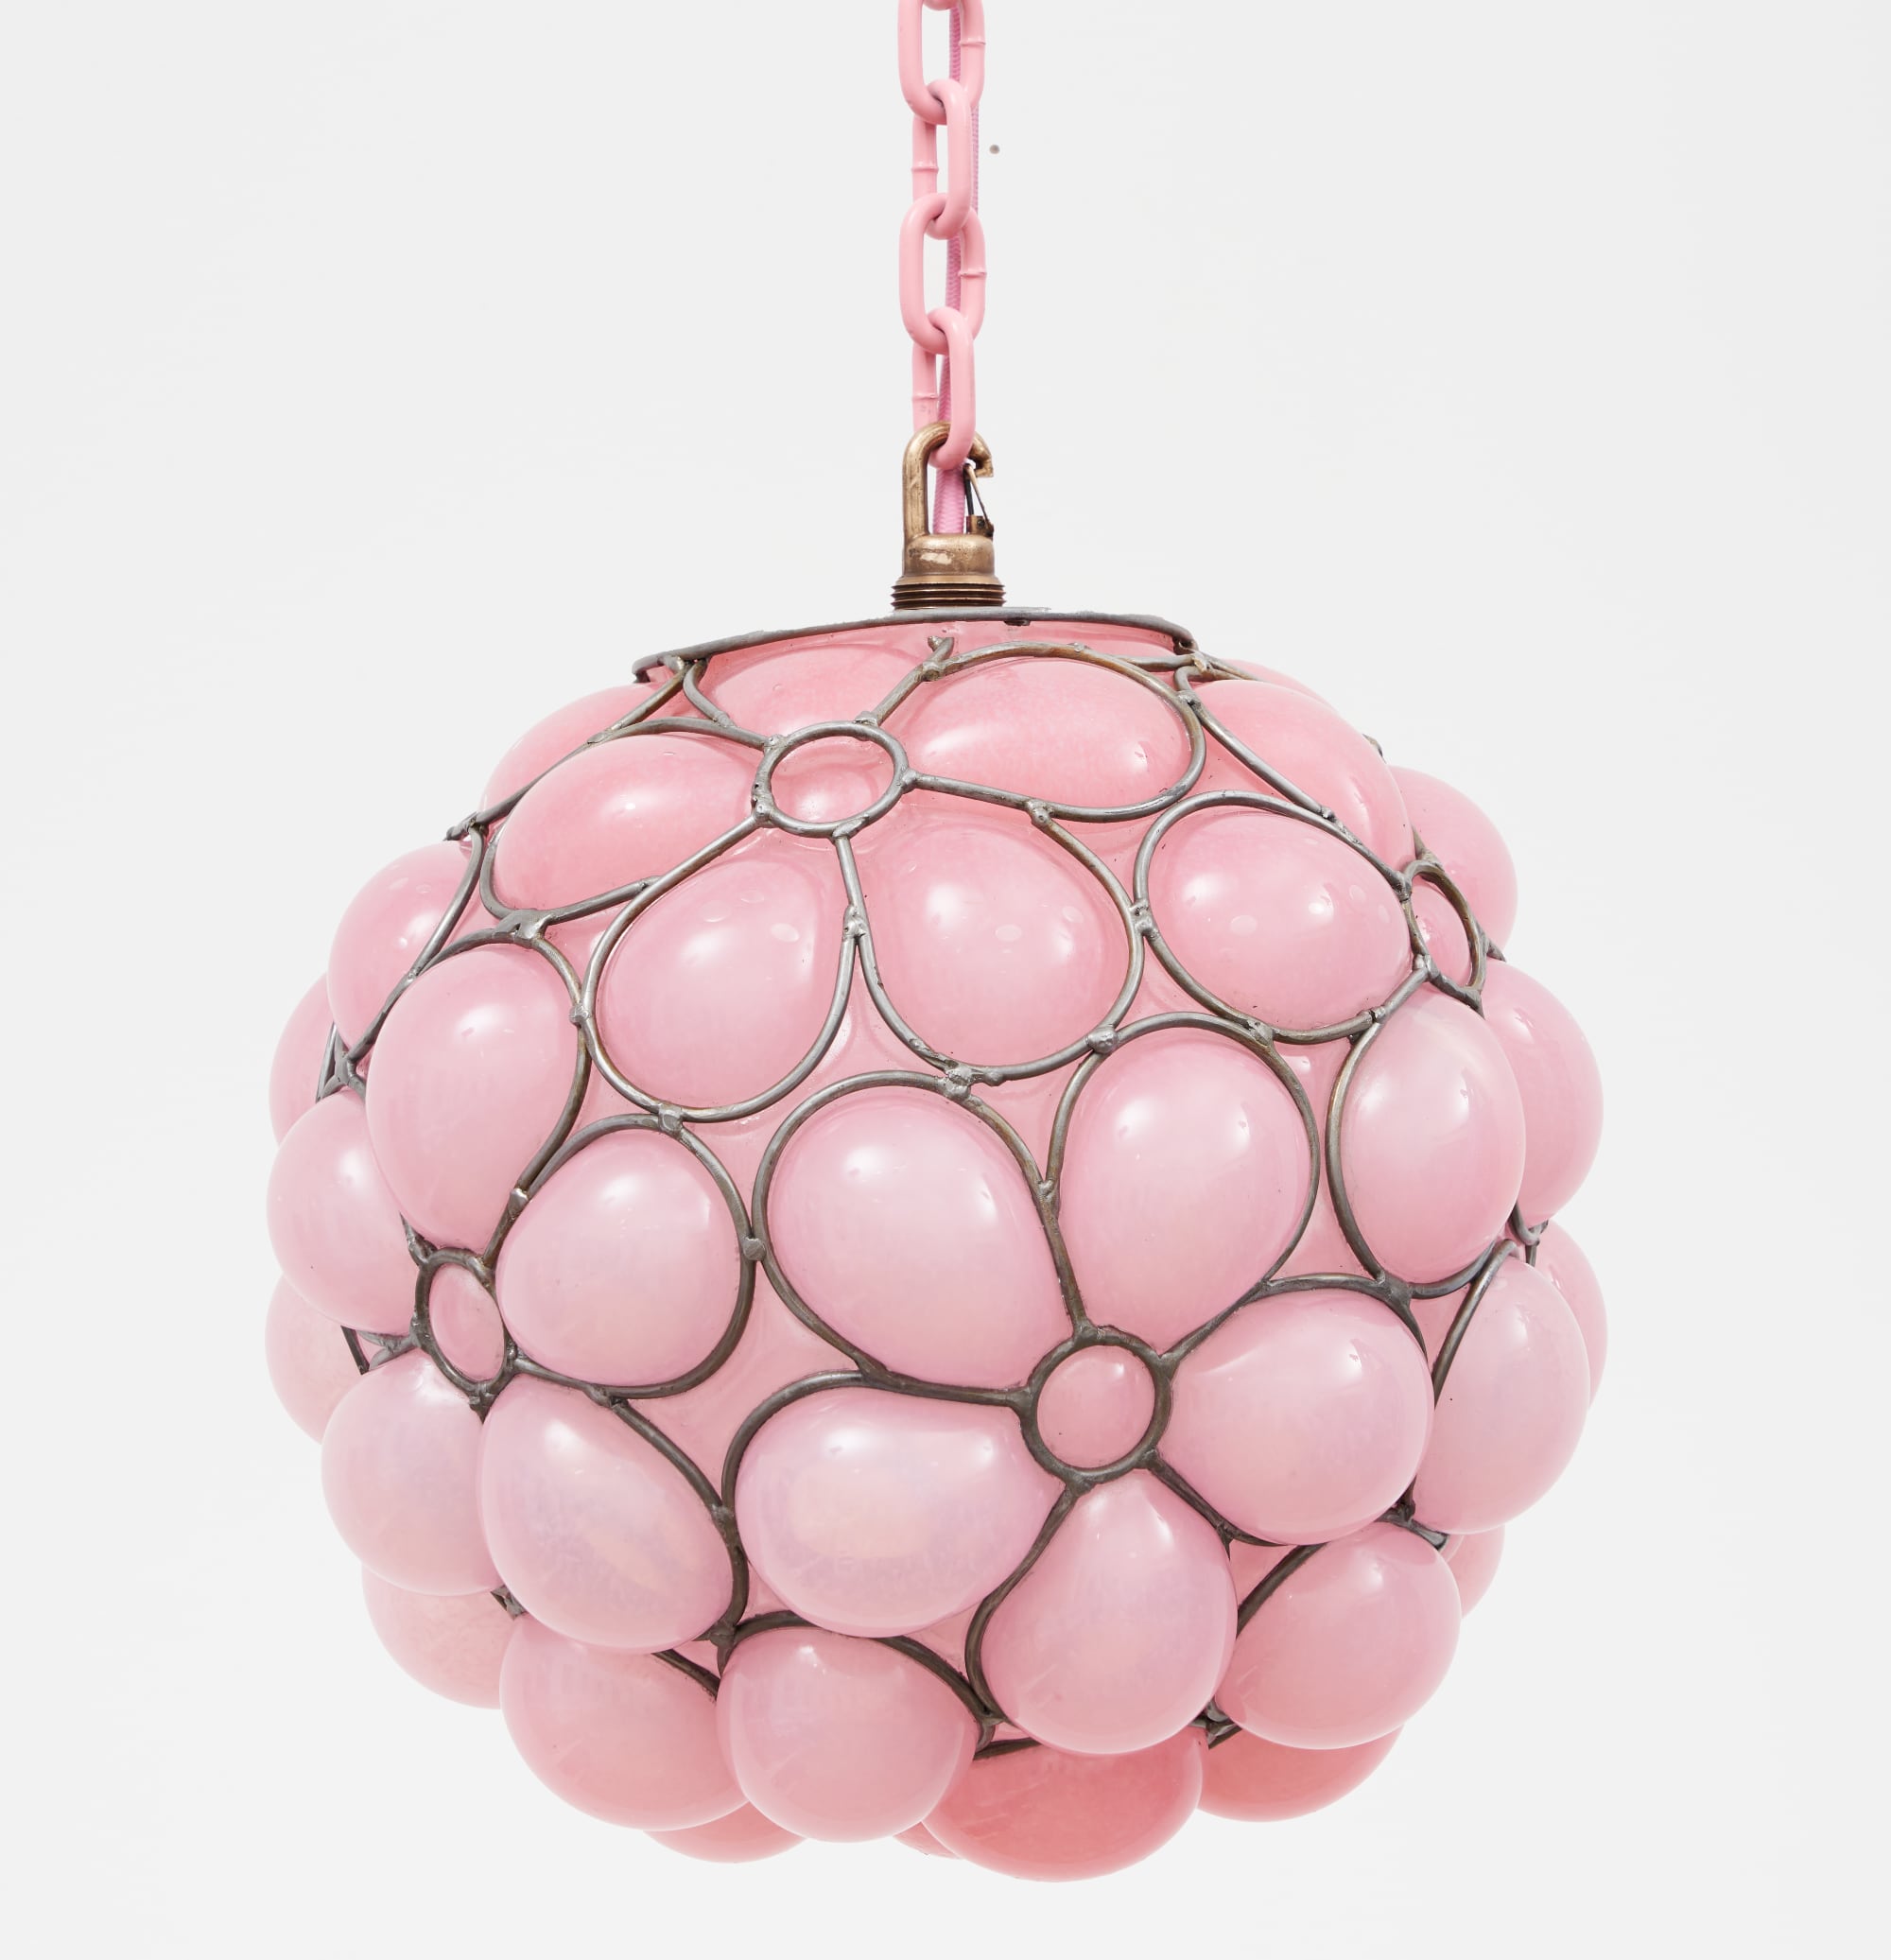 a glass blown pendant lamp hanging from a chain that bubbles inside steel armature and appears like a pink ball of flowers